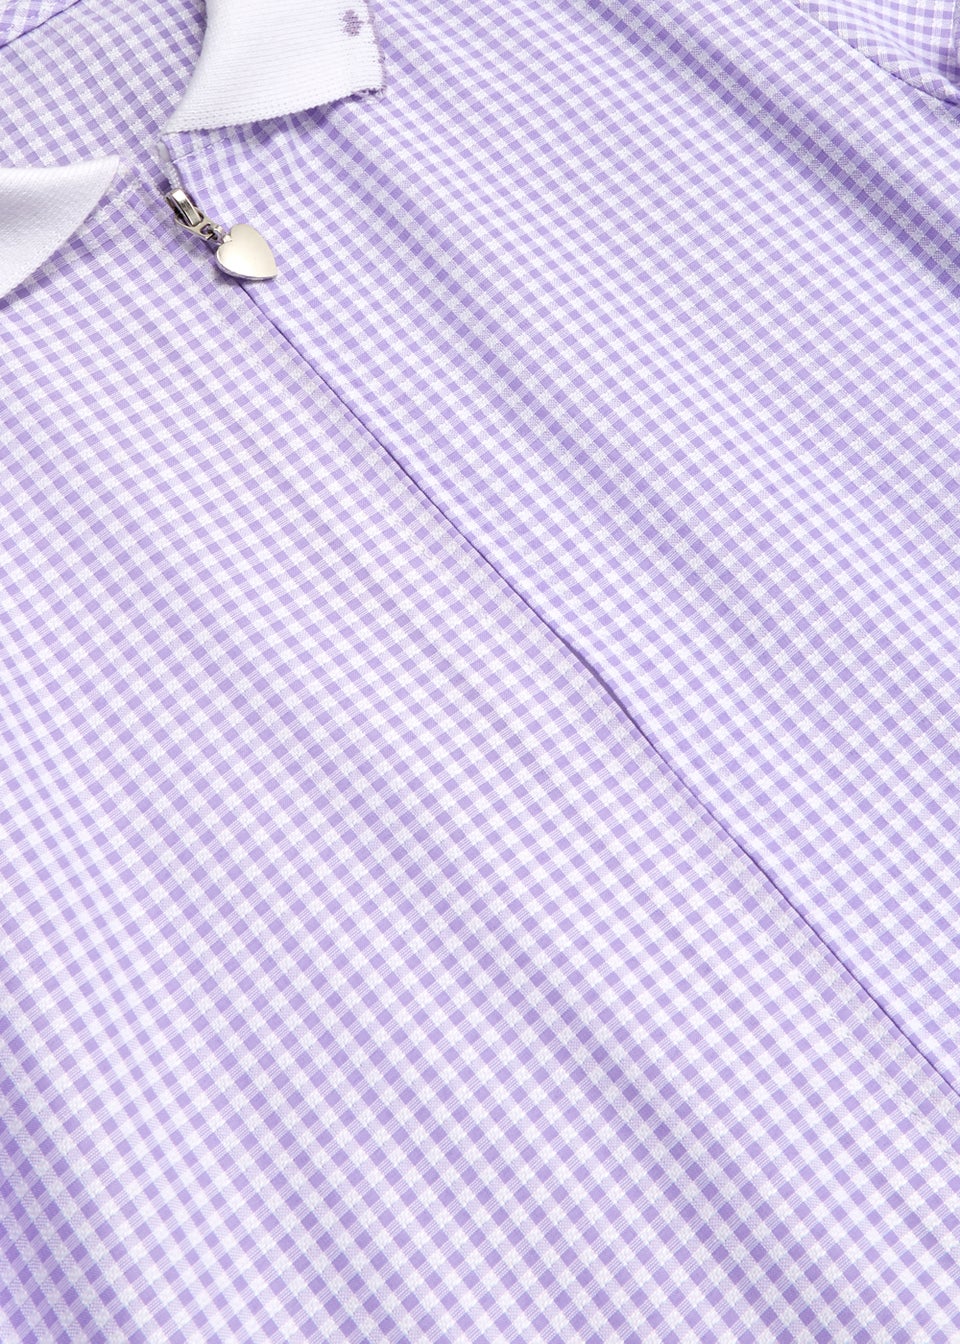 Girls Lilac Generous Fit Knitted Collar Gingham School Dress (3-14yrs)